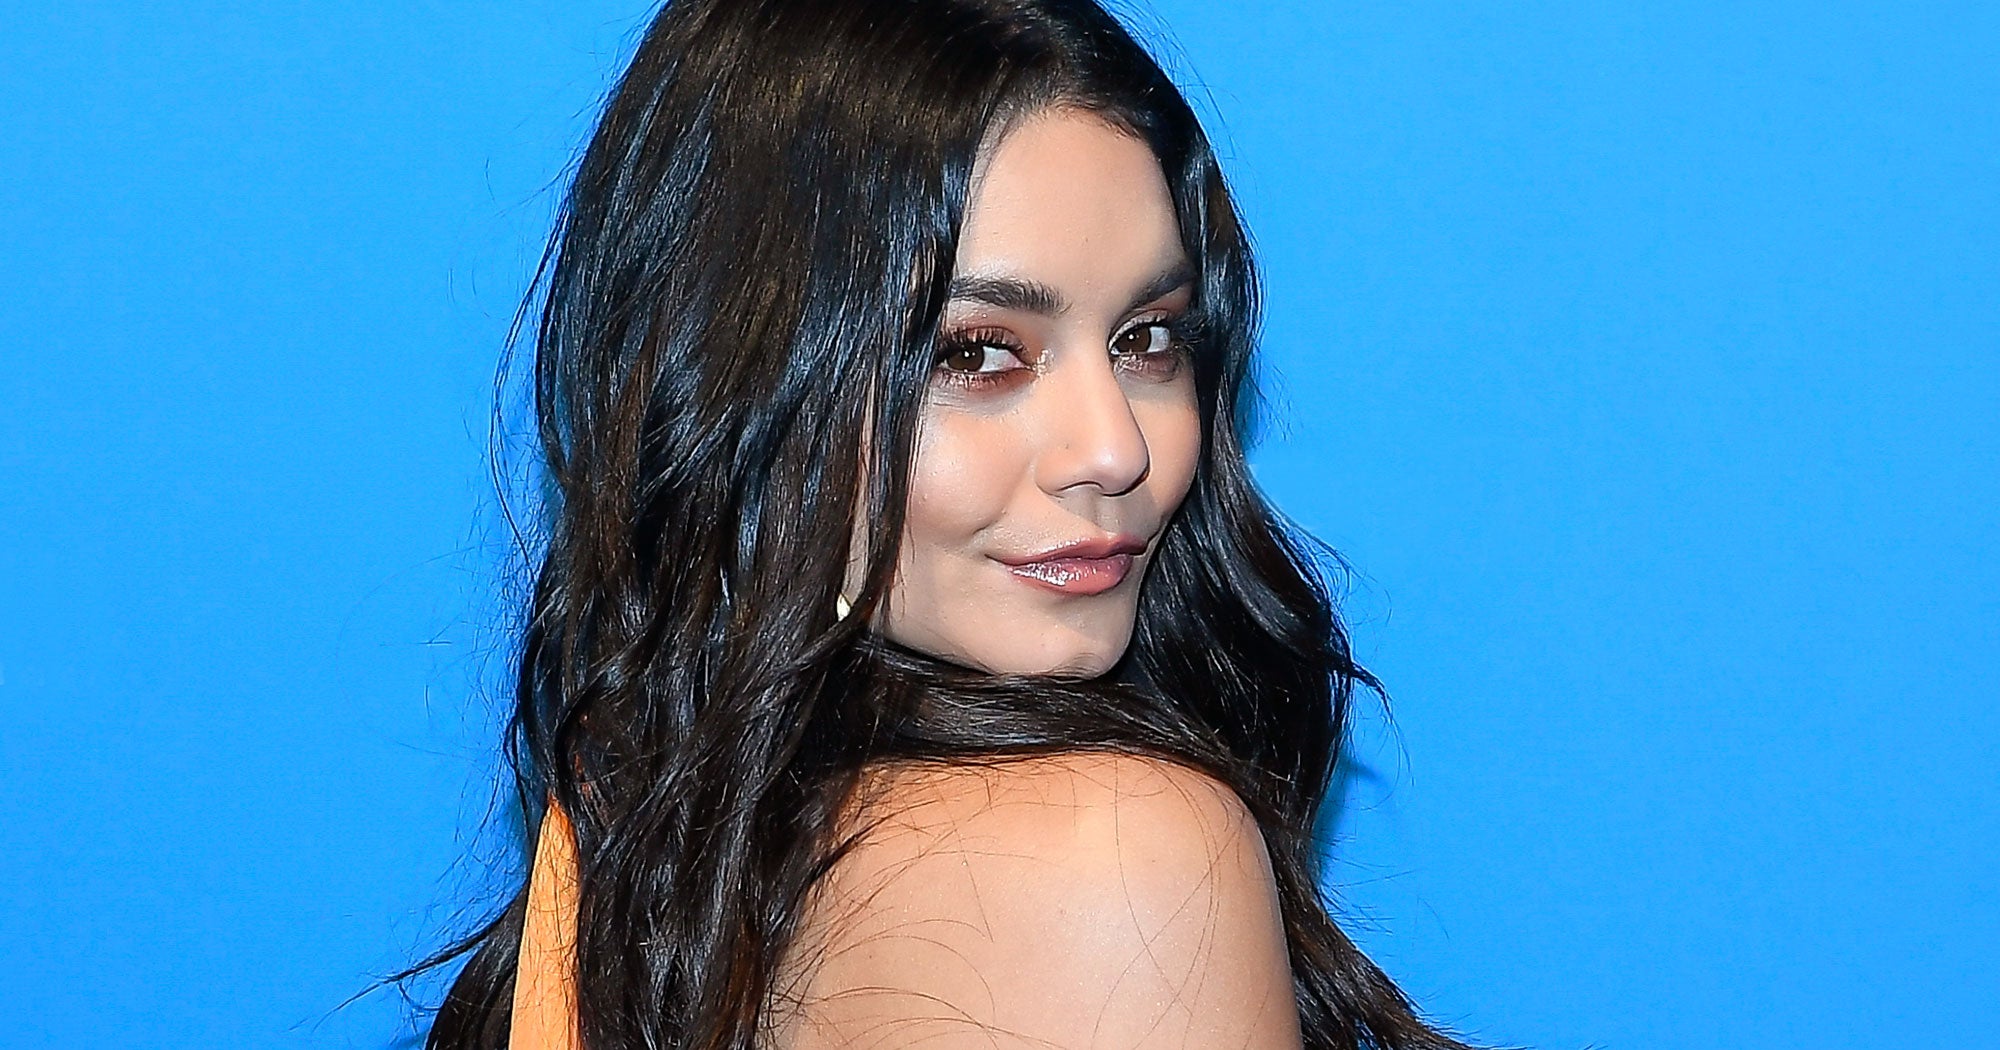 christy keel recommends vanessa hudgens nude imgur pic